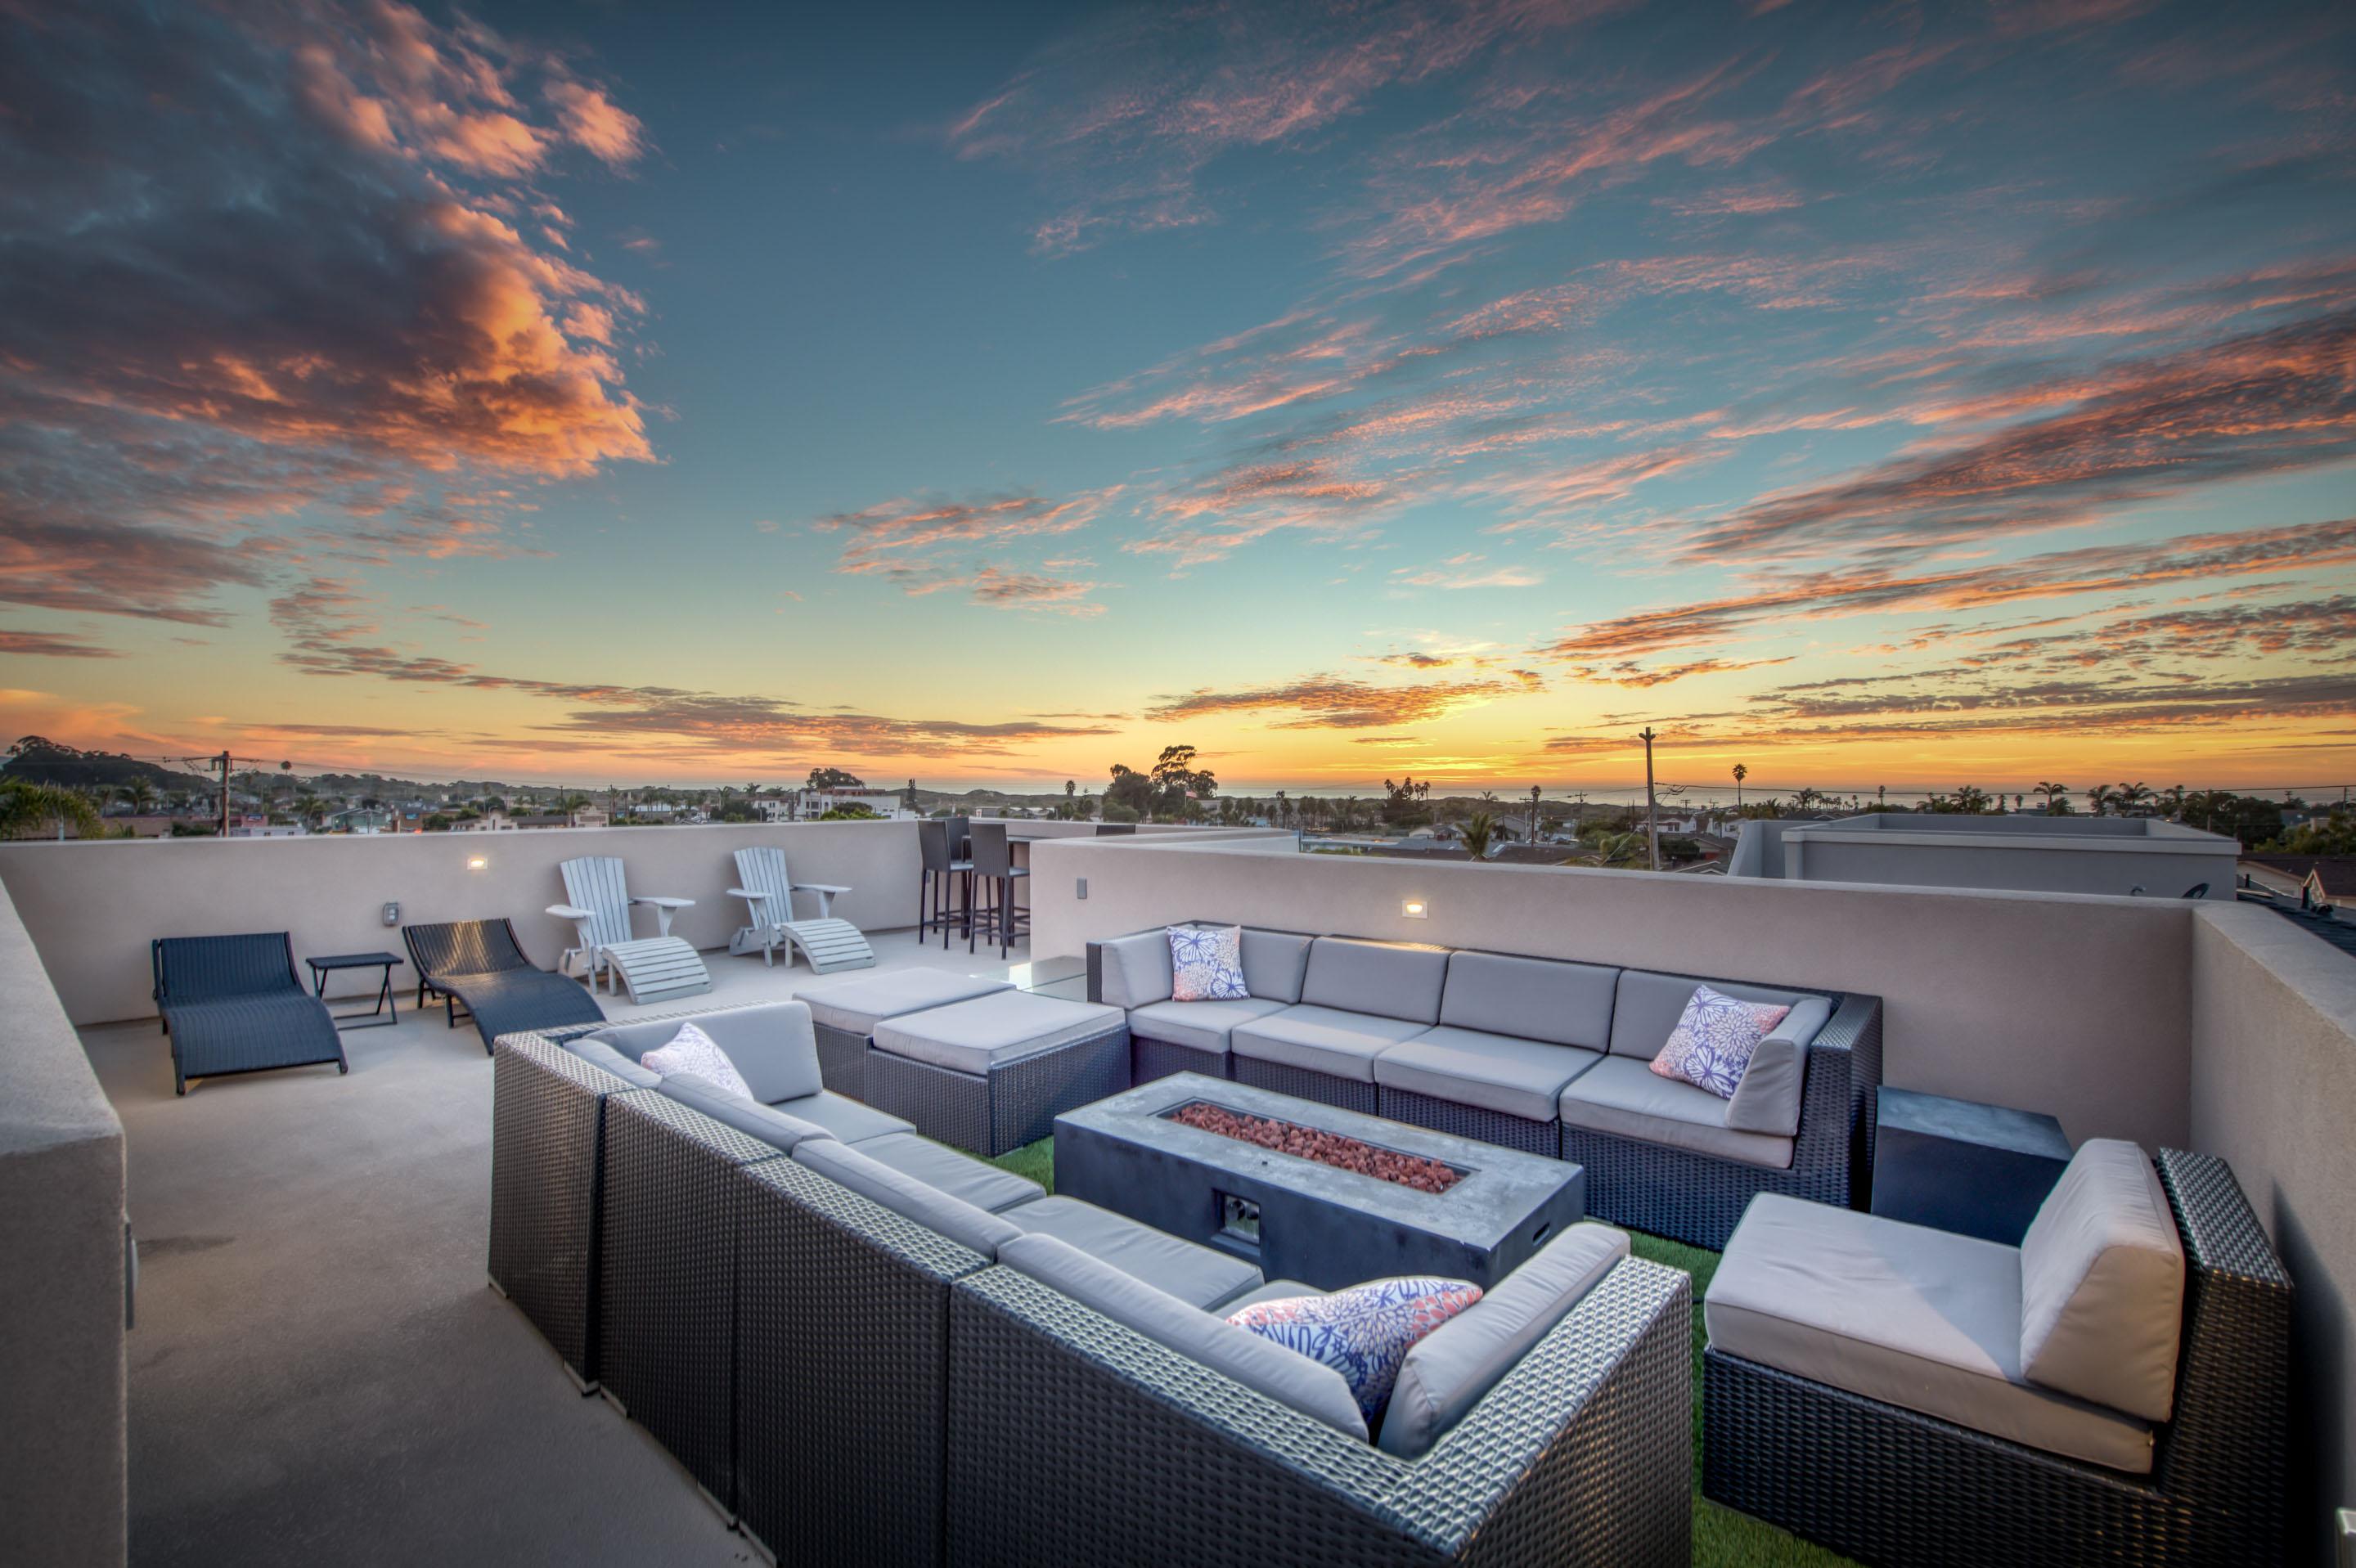 Open air living at its finest. The roof deck of Surf and Sunset.